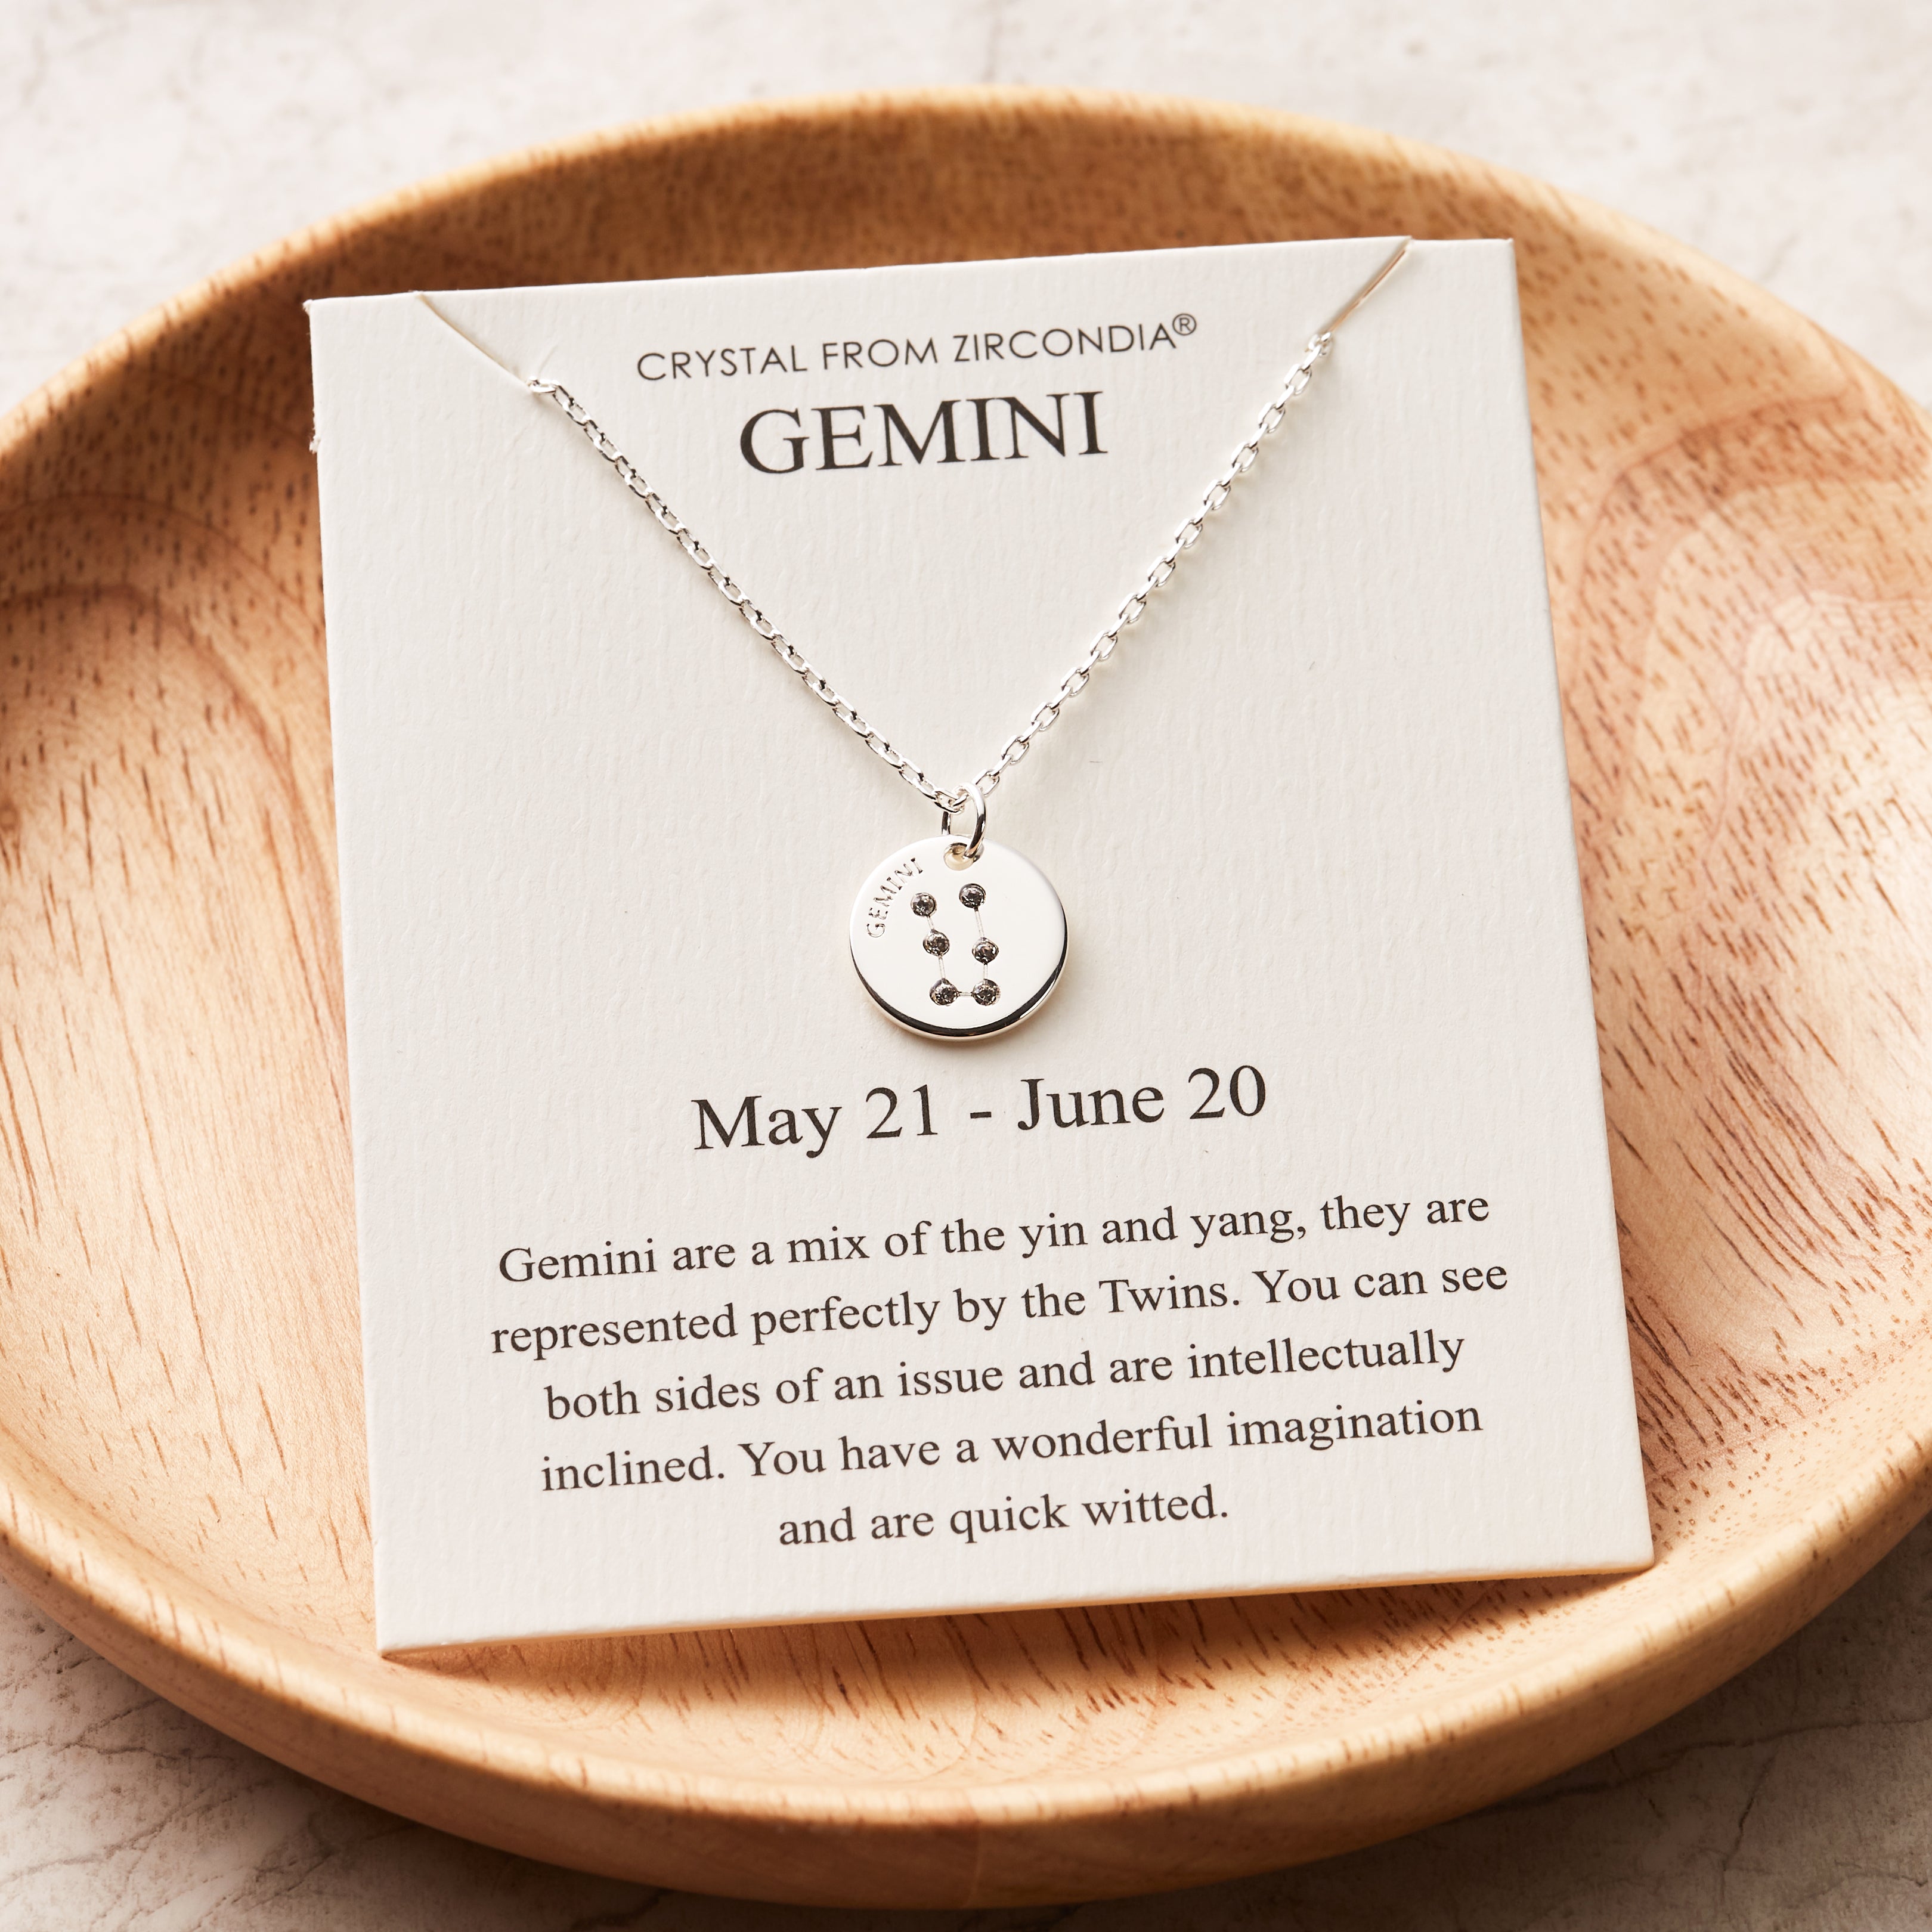 Gemini Zodiac Star Sign Disc Necklace Created with Zircondia® Crystals